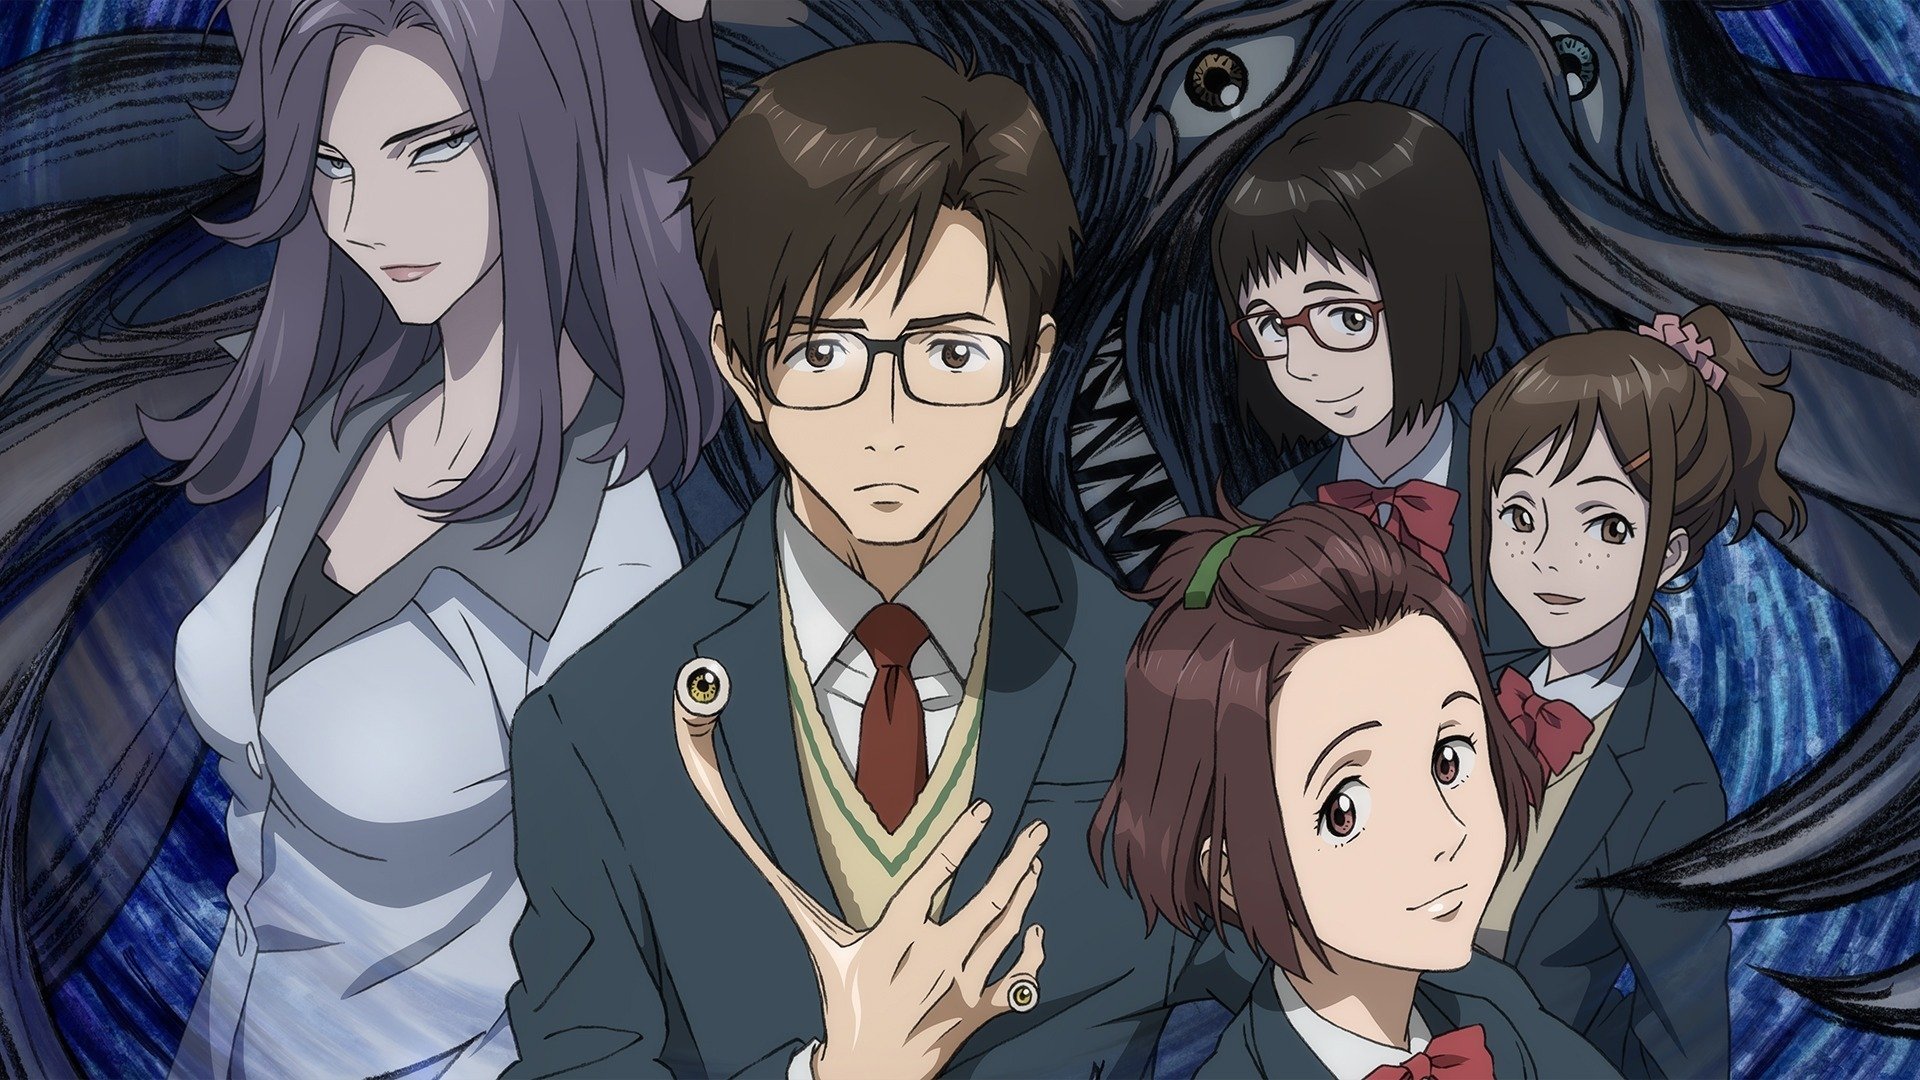 The Overlook Theatre Parasyte The Maxim is Not a Horror Comedy Anime